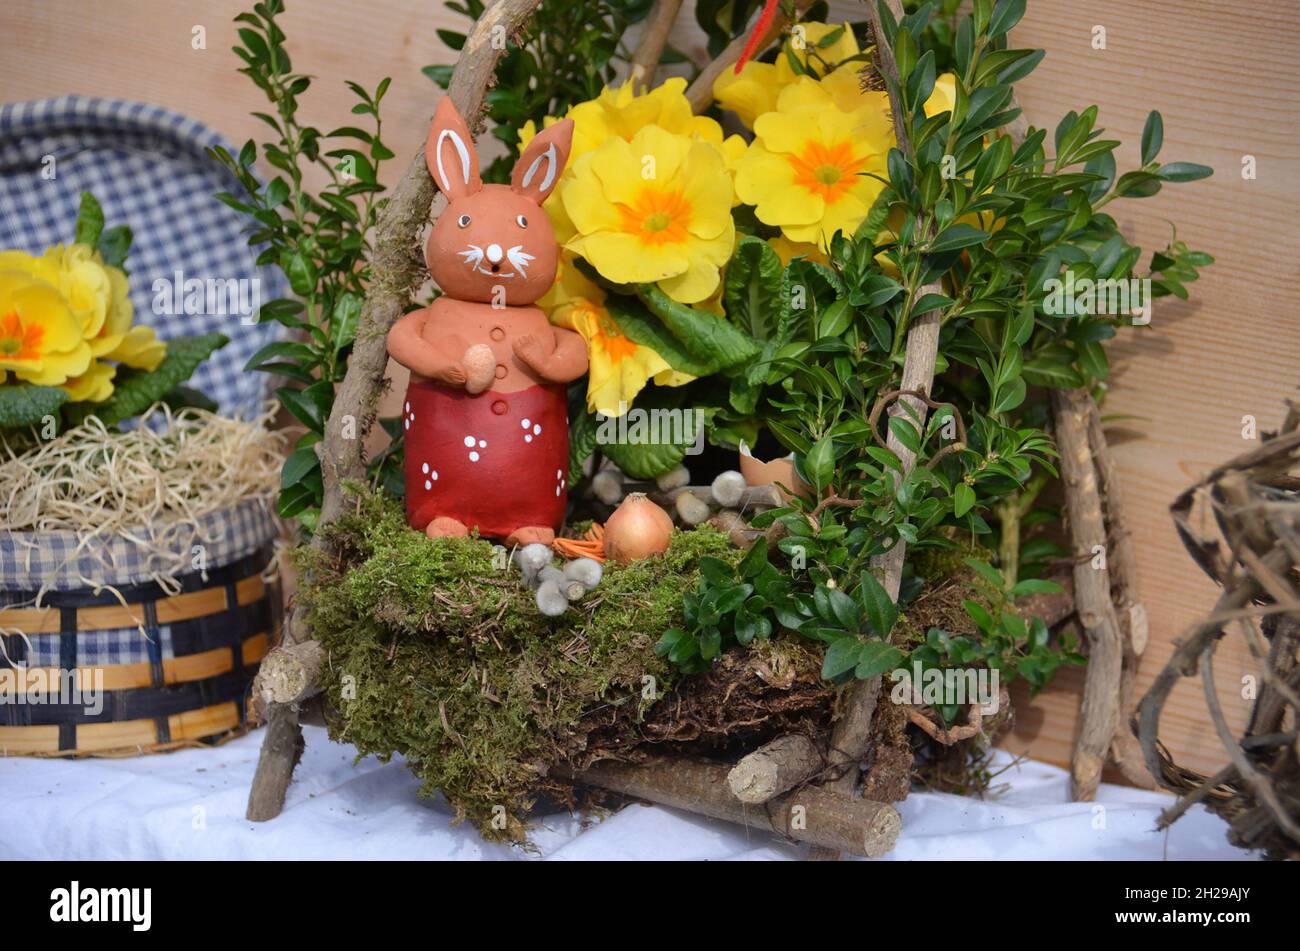 Der Osterhase istr ein österliches Symbol - The Easter bunny is an Easter symbol Stock Photo